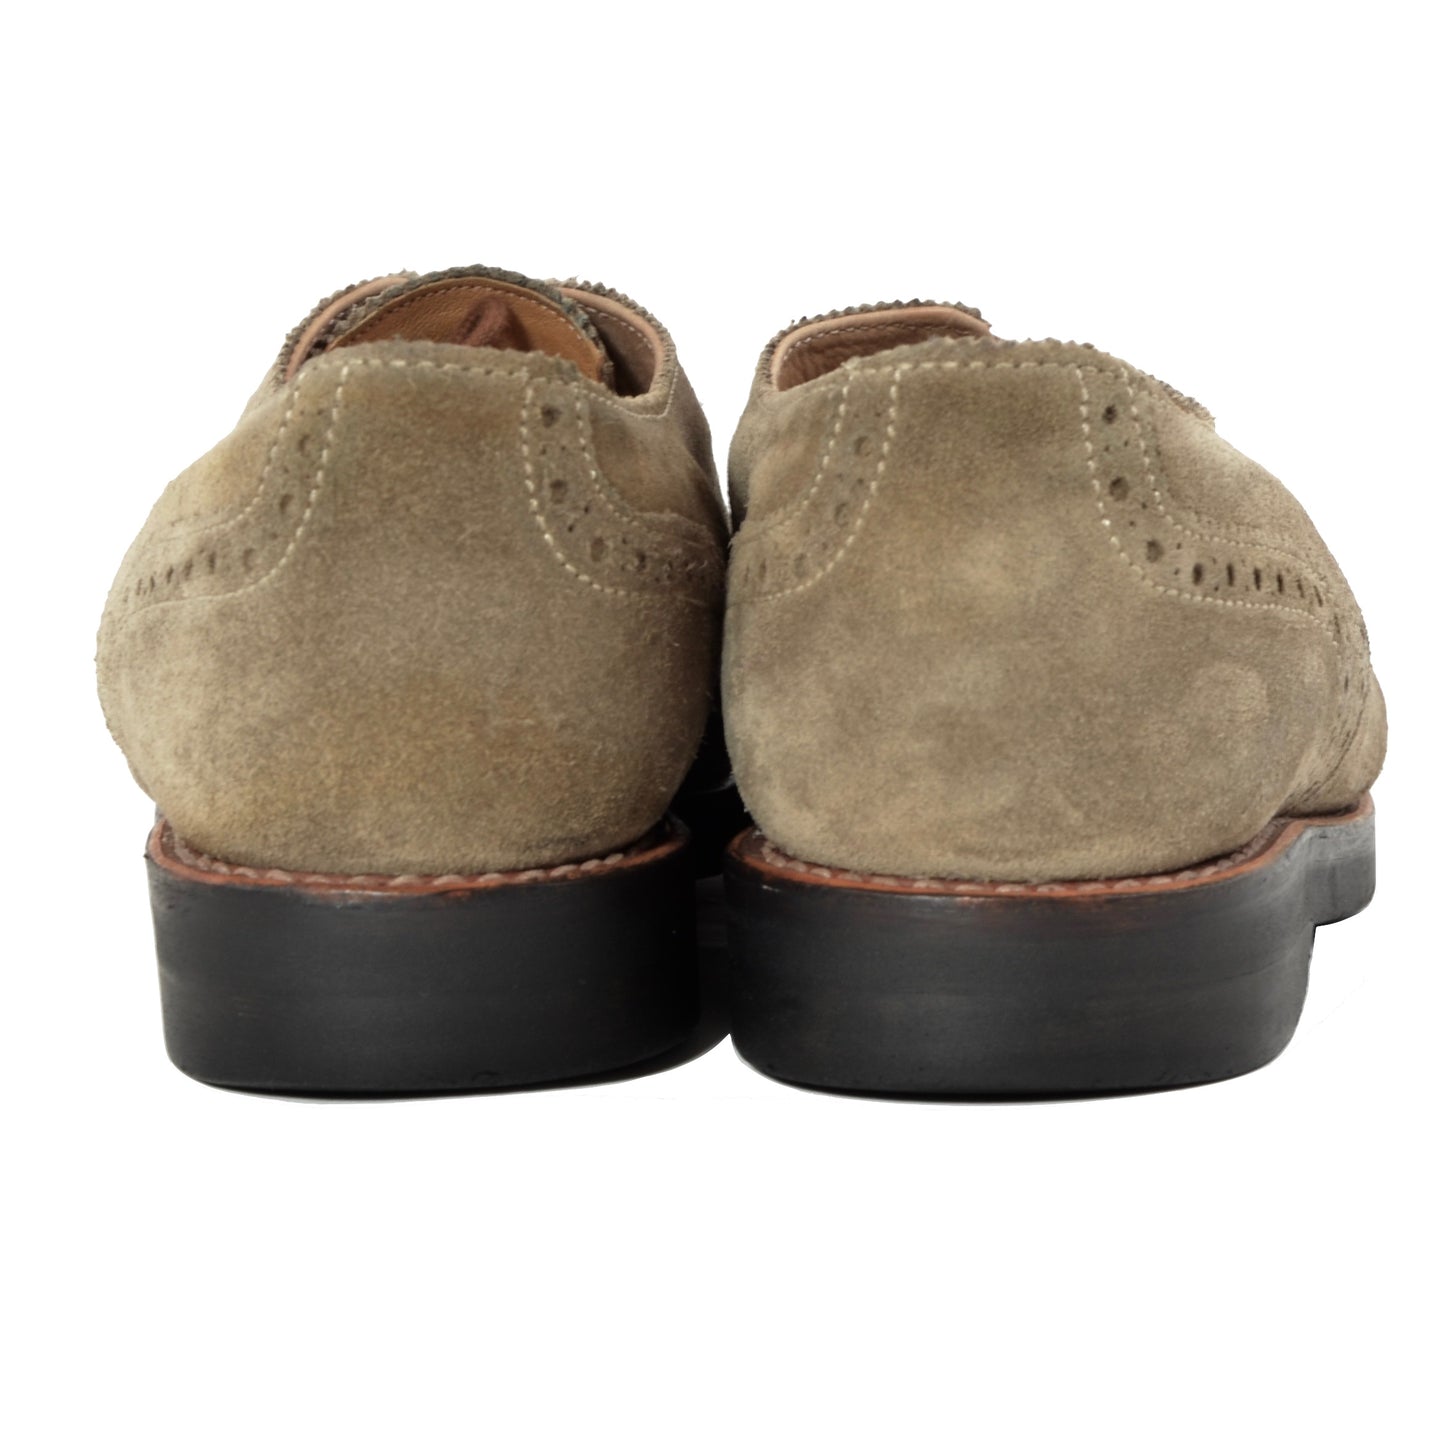 Ludwig Reiter Suede Shoes Size 7 - Sand